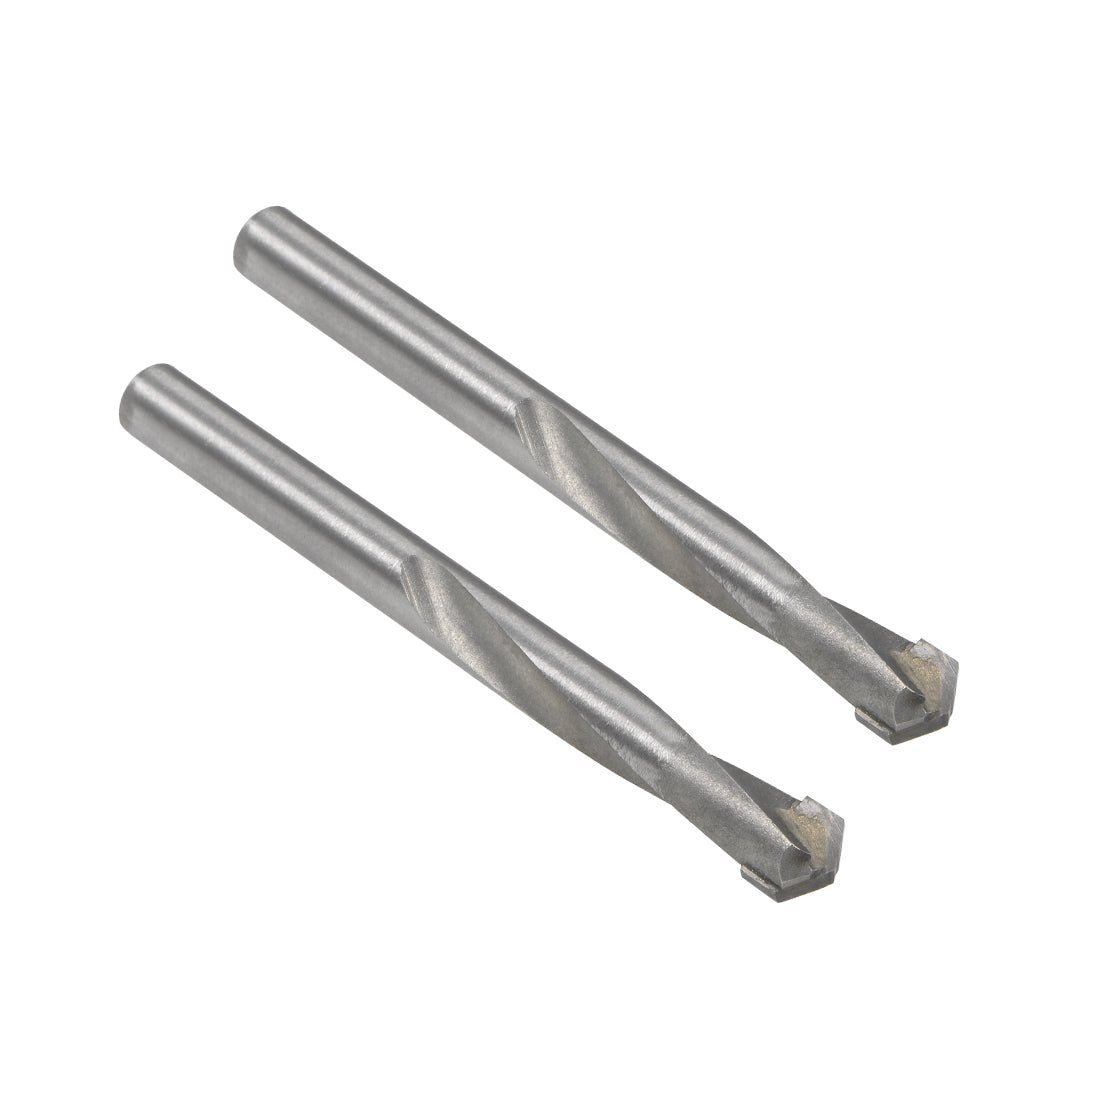 uxcell Uxcell 10.5mm Cemented Carbide Twist Drill Bit for Stainless Steel Copper Aluminum 2Pcs